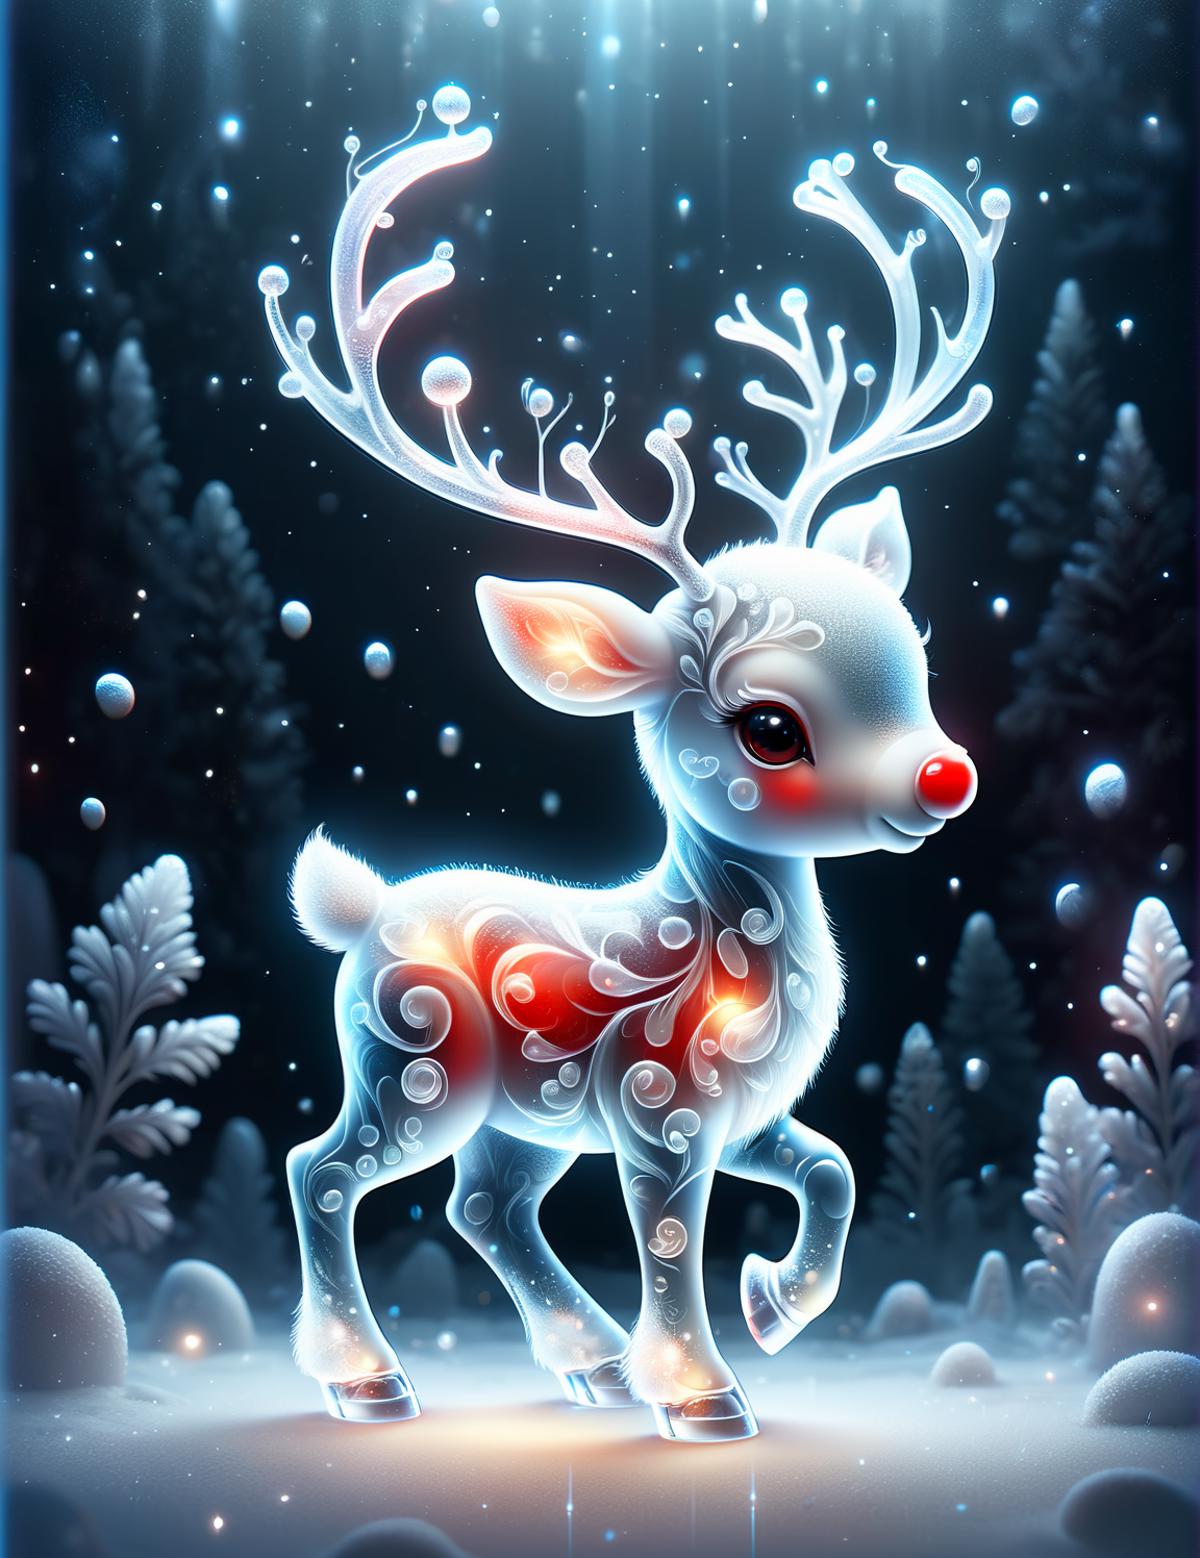 A deer with antlers and a red nose standing on snow with trees in the background.